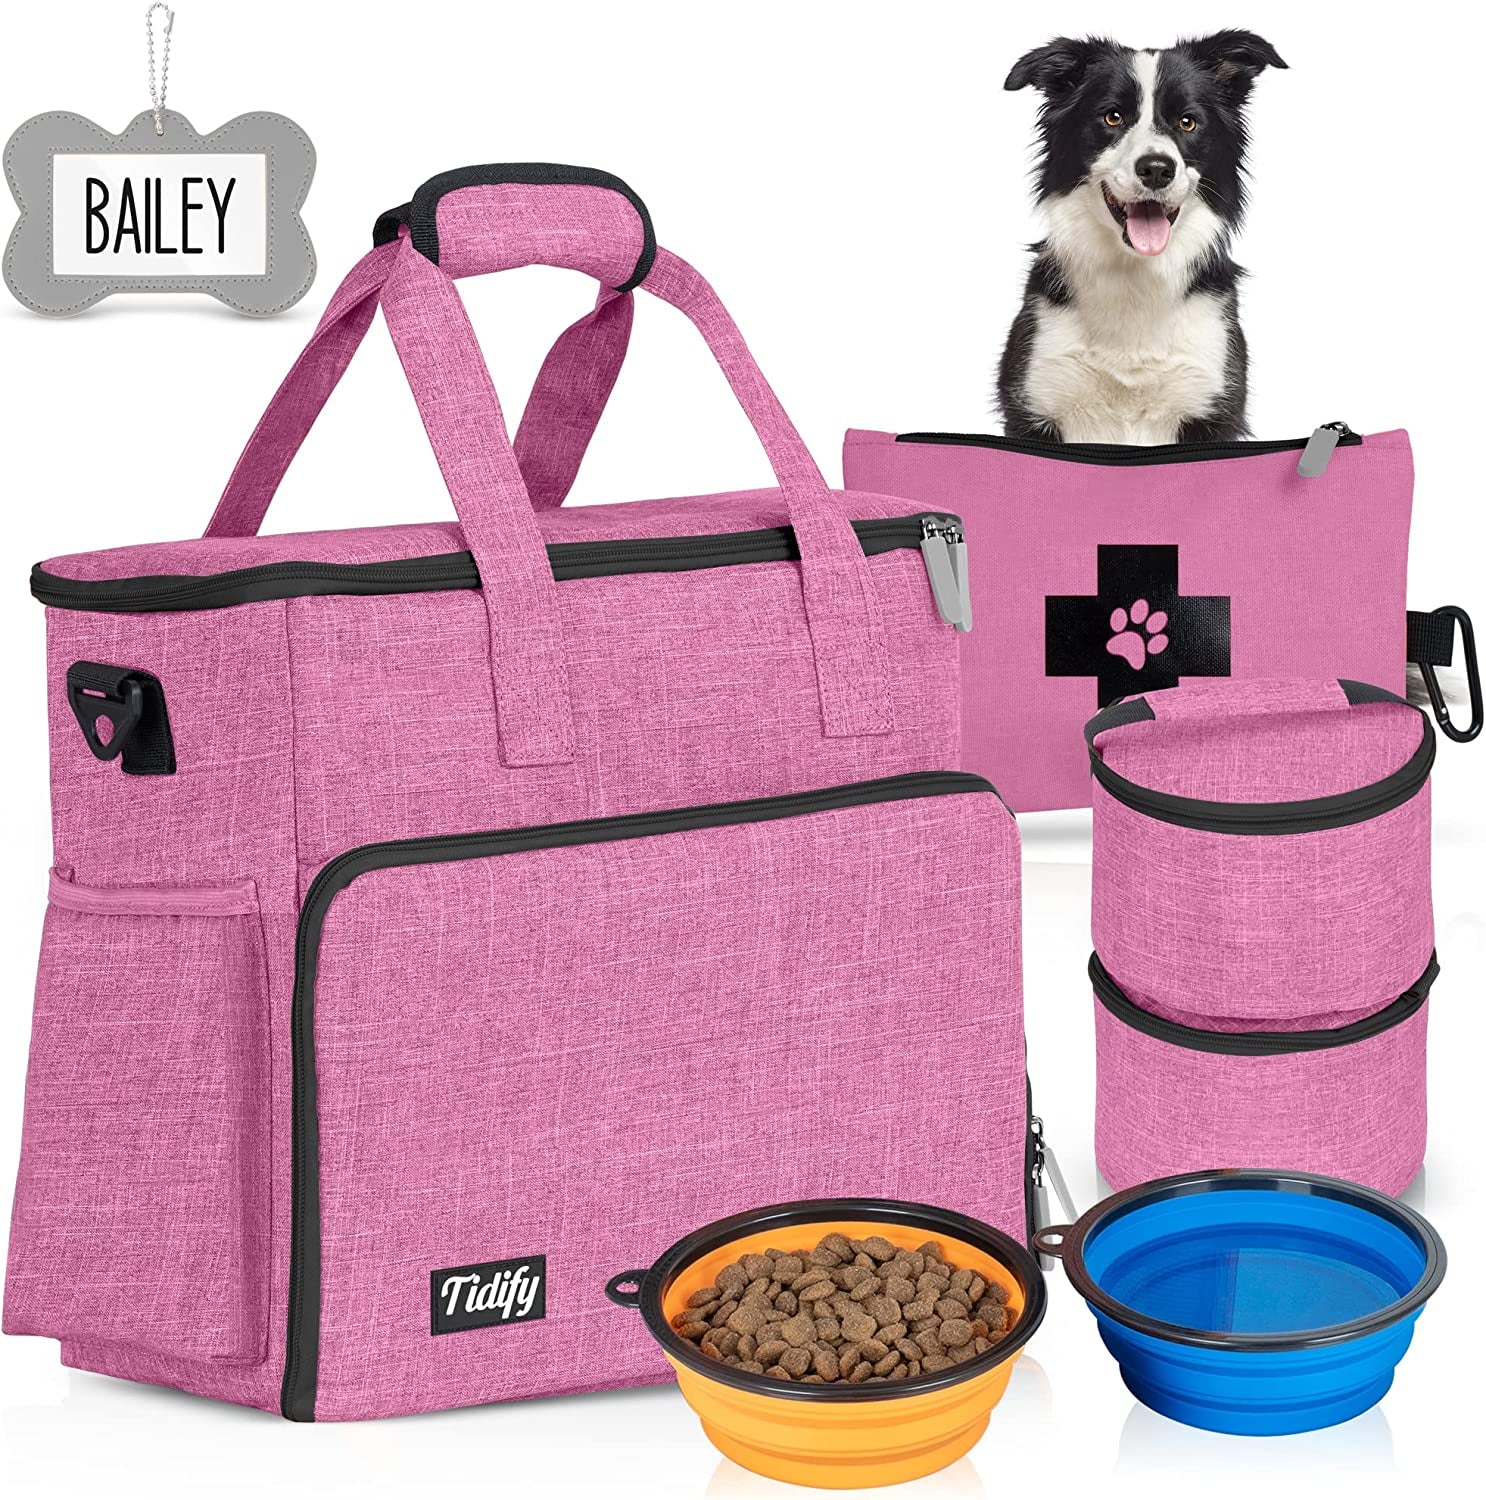 Dog Travel Bag Airline Approved for Dog and Cat Tote Organizer with Multi Function Pockets, 2 Food Containers and Collapsible Bowls, Weekend Away Dog Bag for Travel Accessories (Pink)